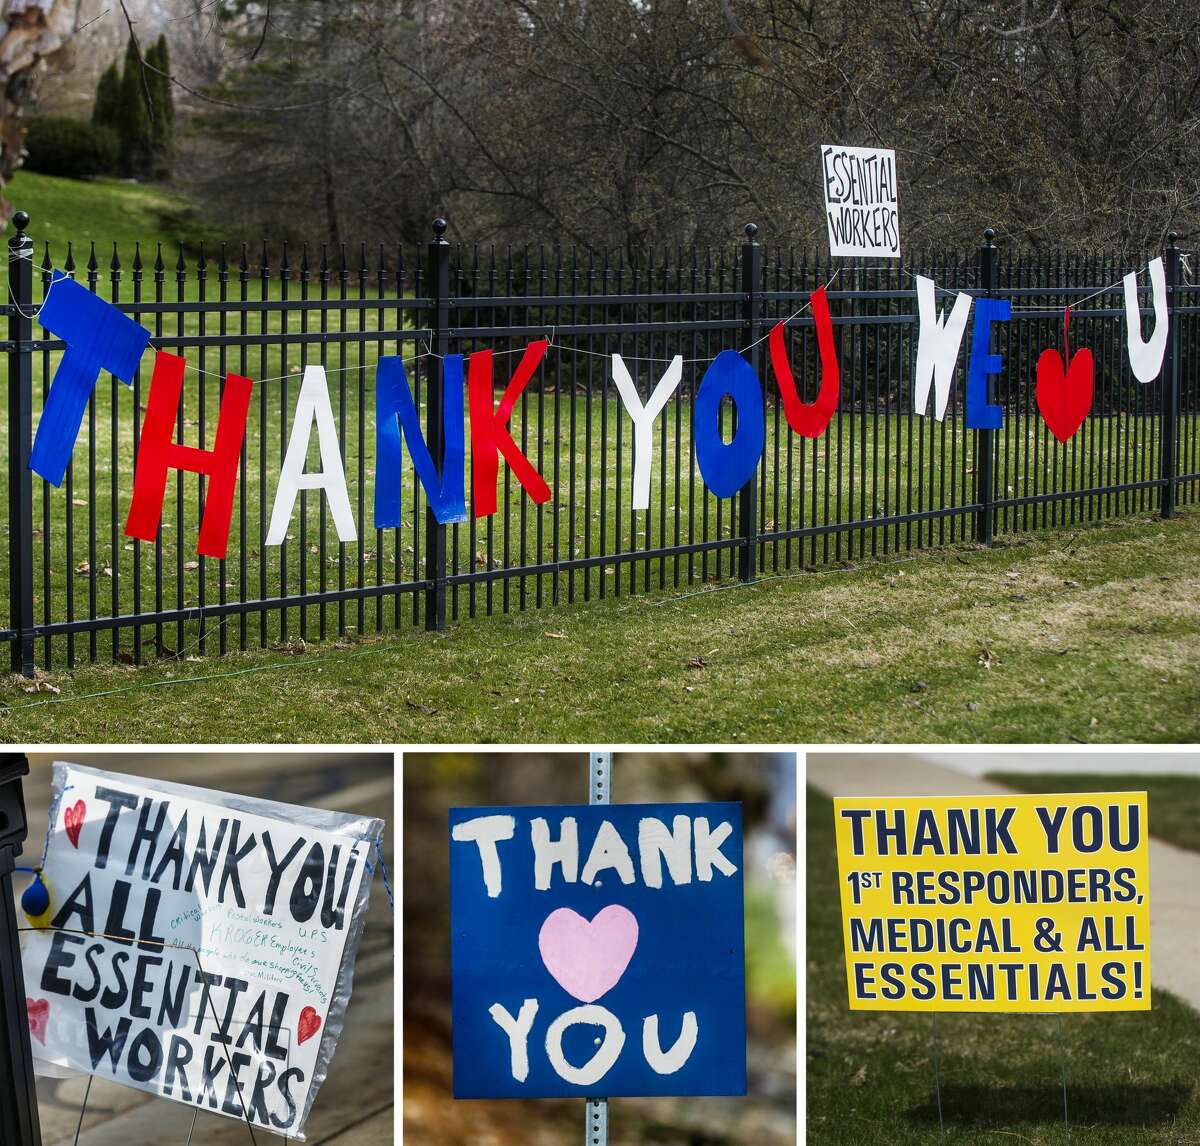 Signs thanking essential workers are displayed Wednesday, April 15, 2020 outside of homes along Sugnet Road, where hospital employees may see them on their way to work. (Katy Kildee/kkildee@mdn.net)